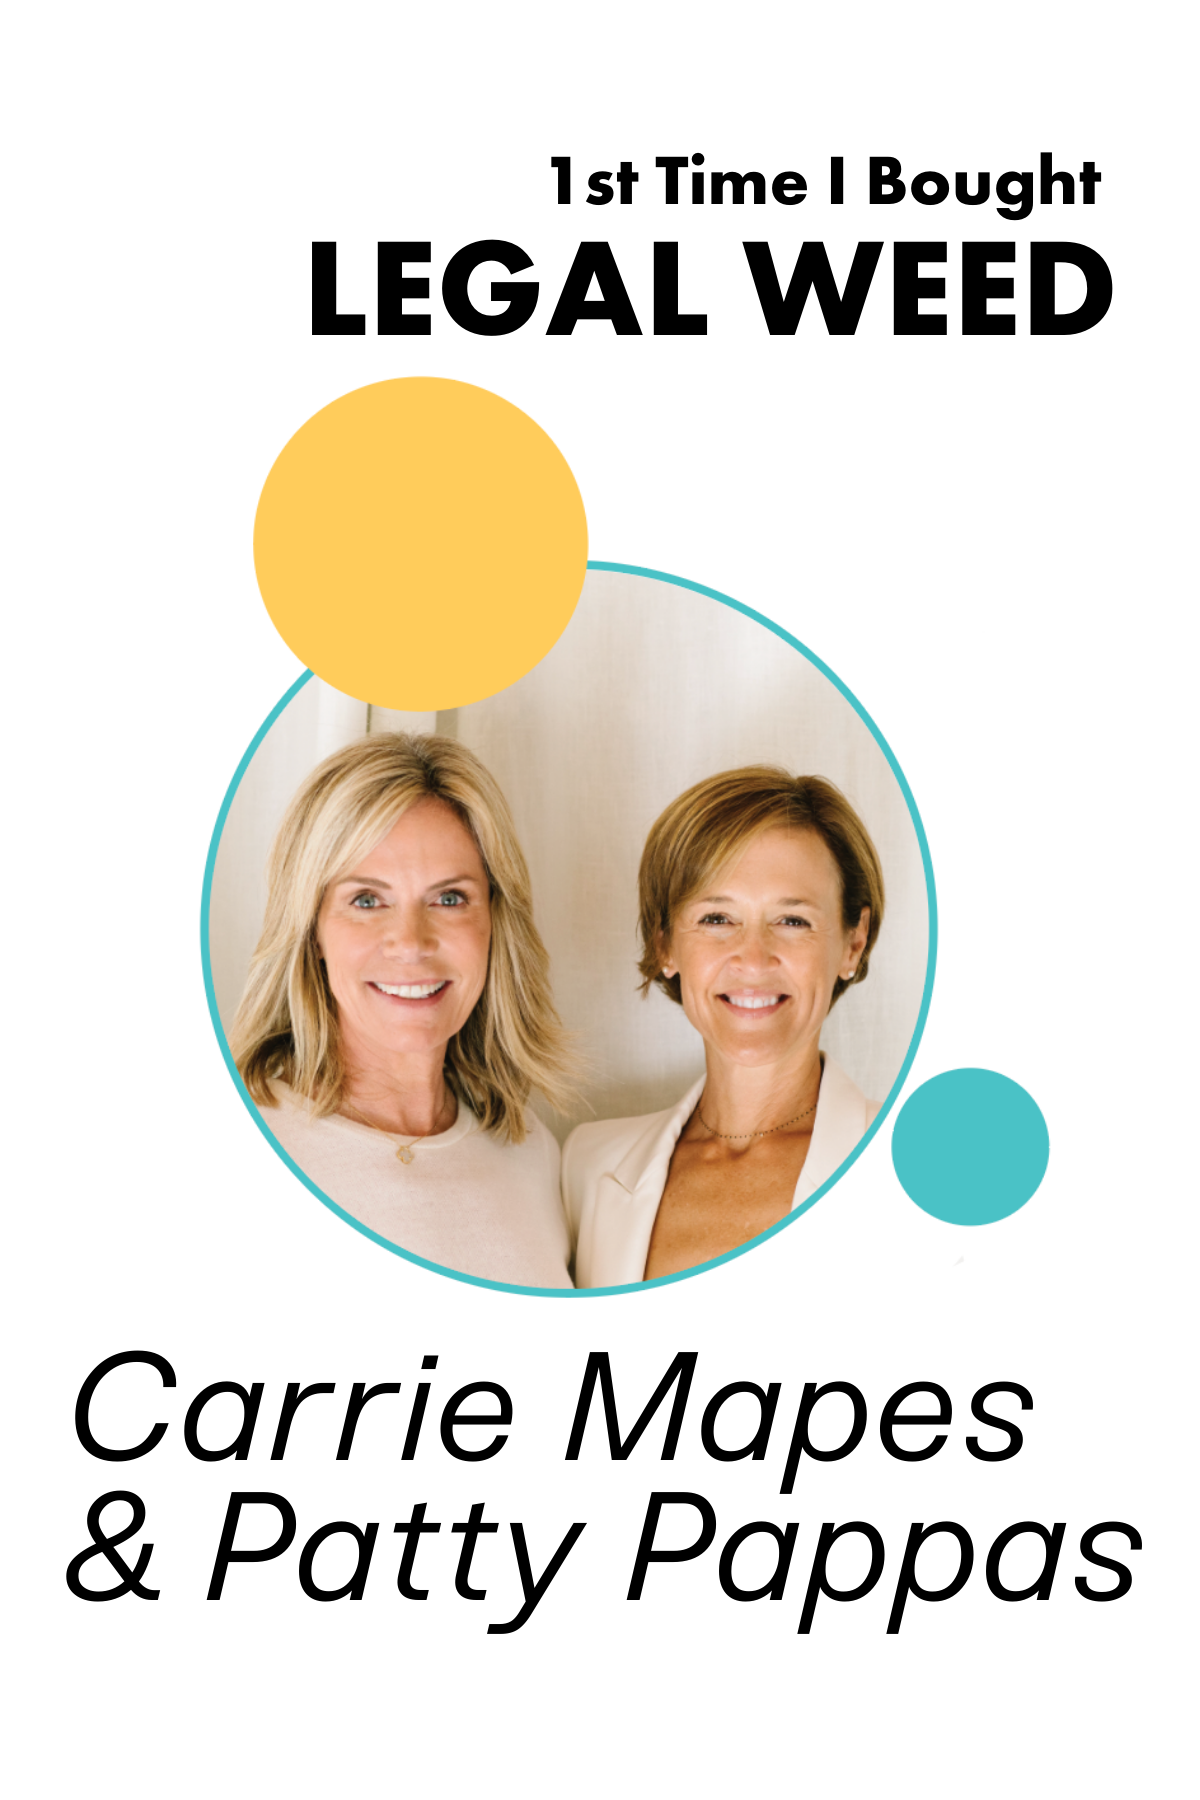 63. 1st Time I Bought Legal Weed: Carrie Mapes and Patty Pappas